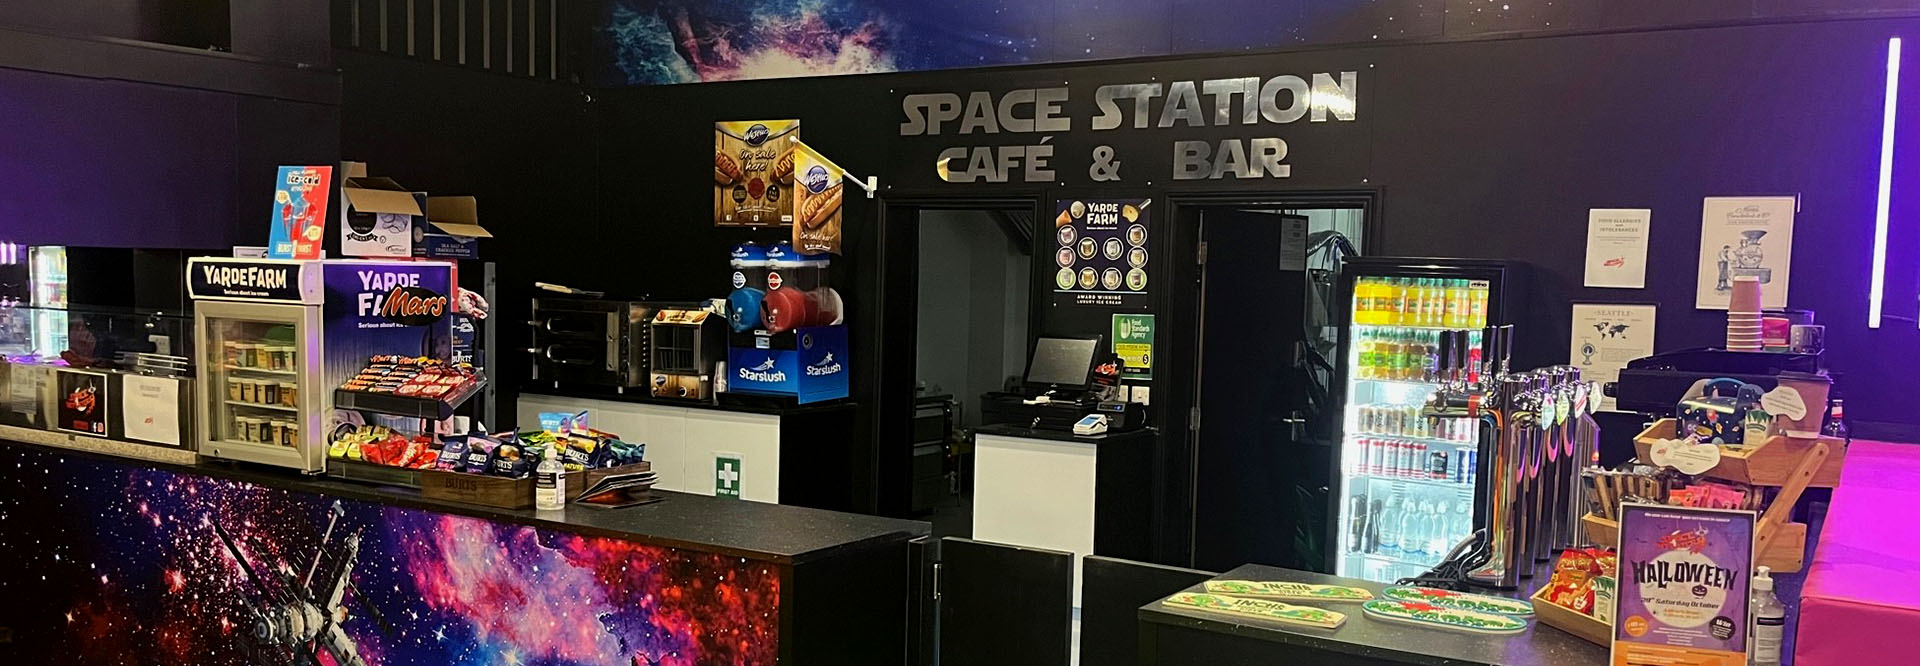 Space Station Cafe